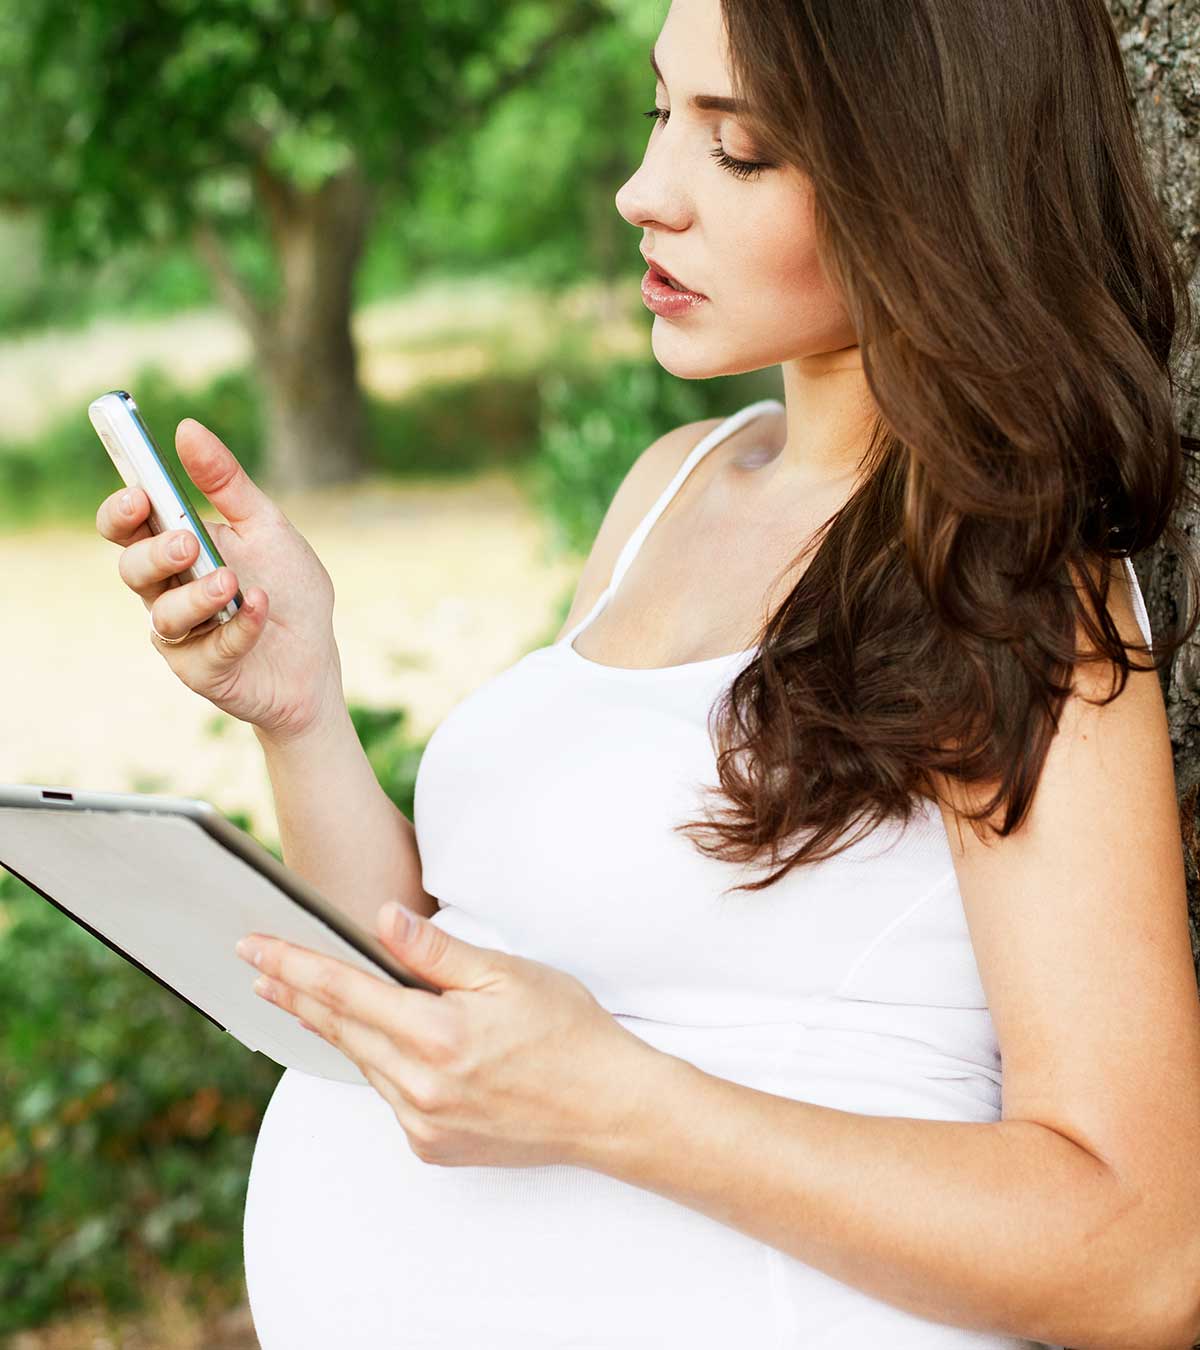 Is It Safe To Use A Mobile Phone During Pregnancy?